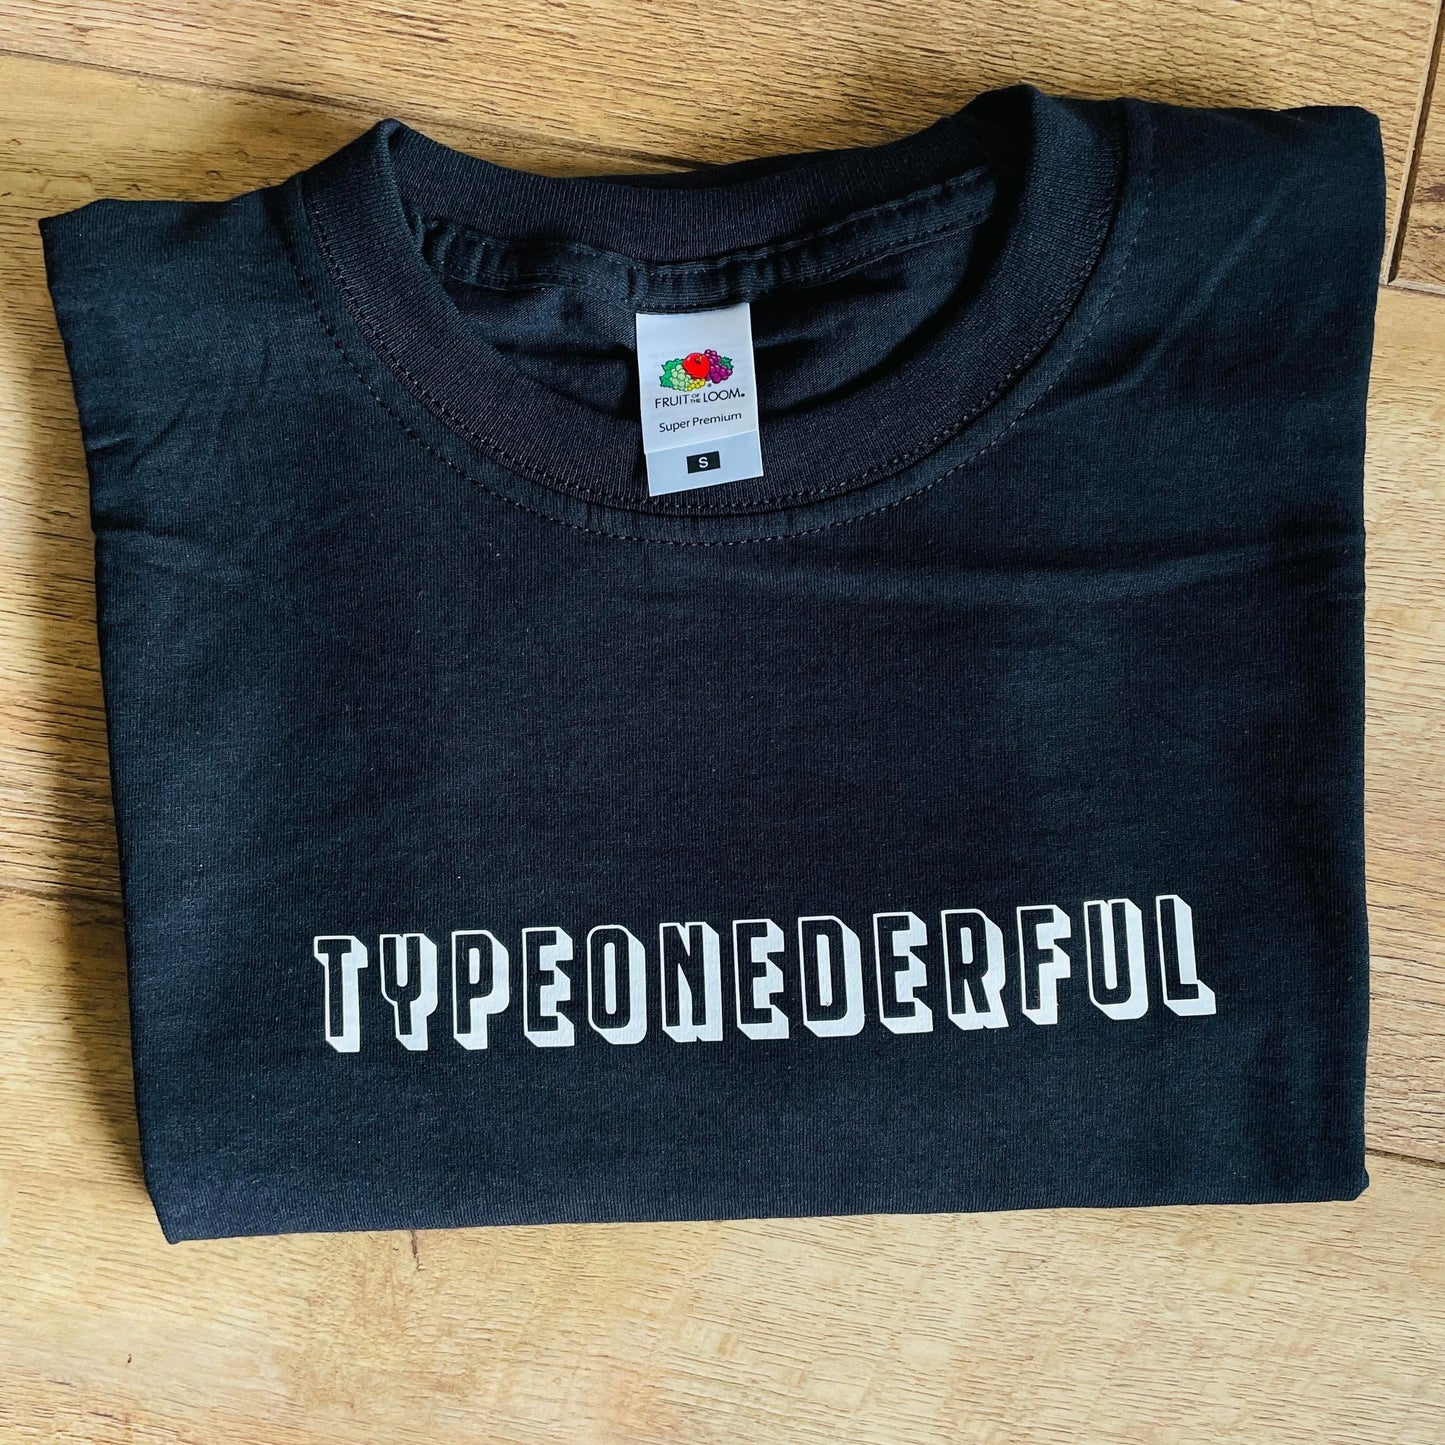 Typeonederful T Shirt